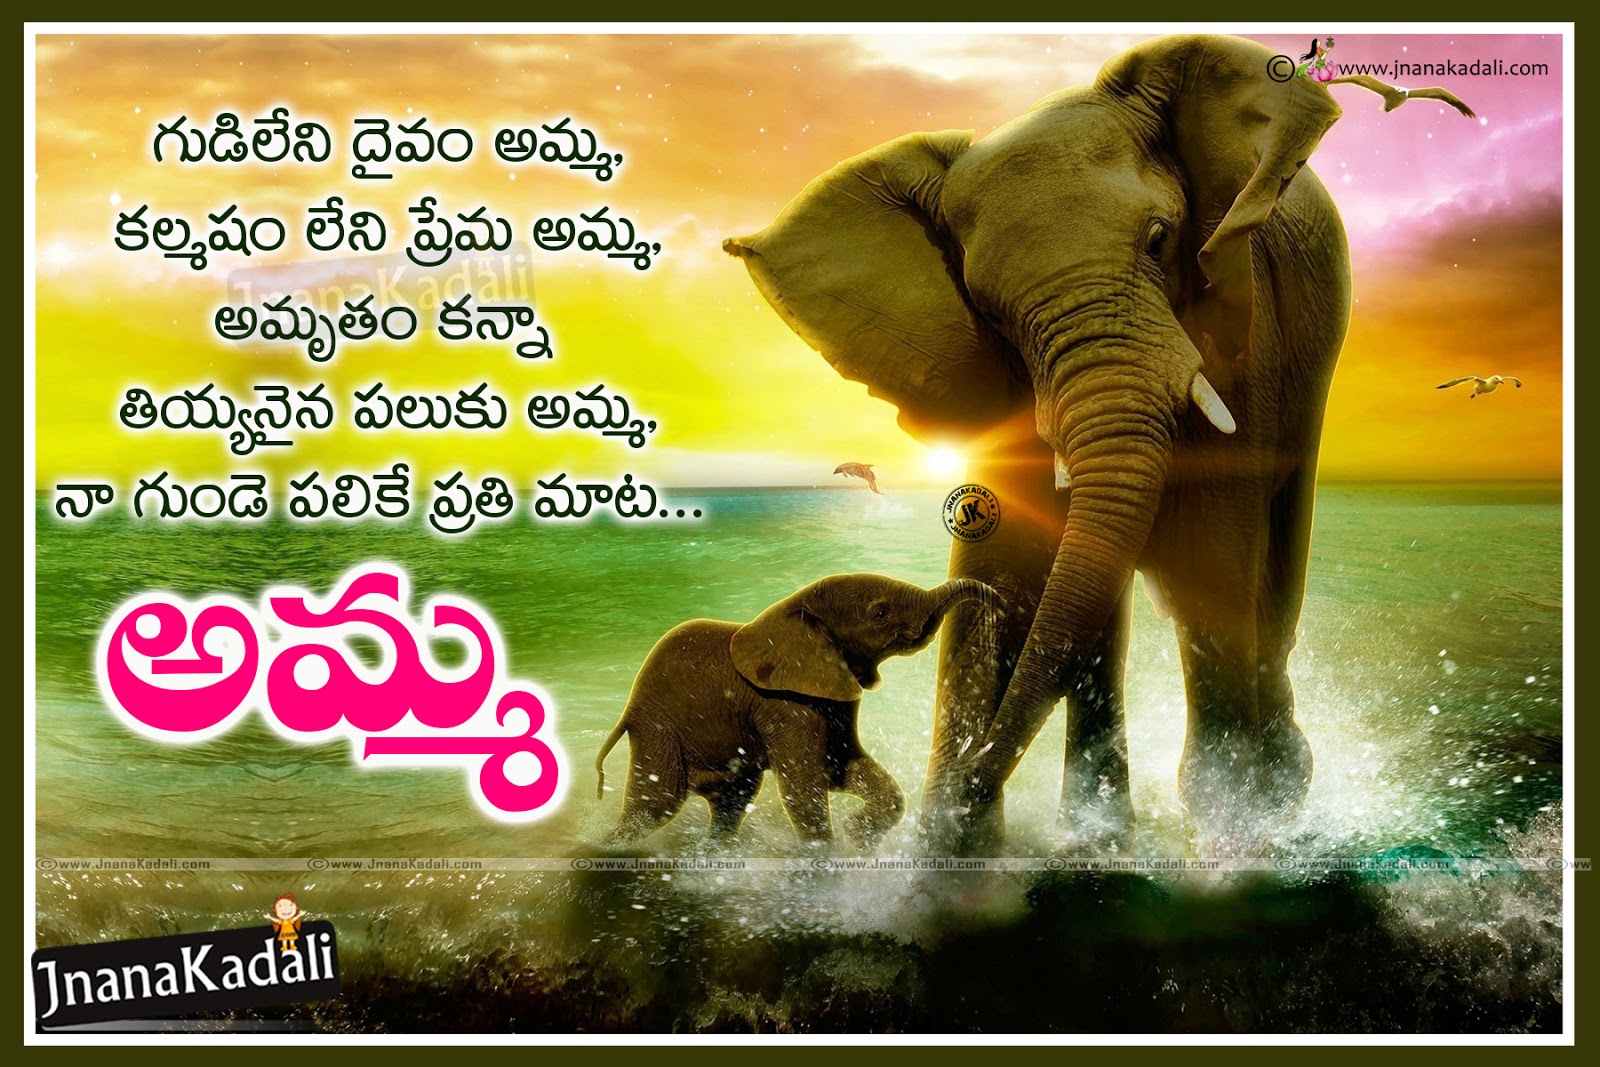 Mother Greatness Quotes hd wallpapers in Telugu | JNANA ...